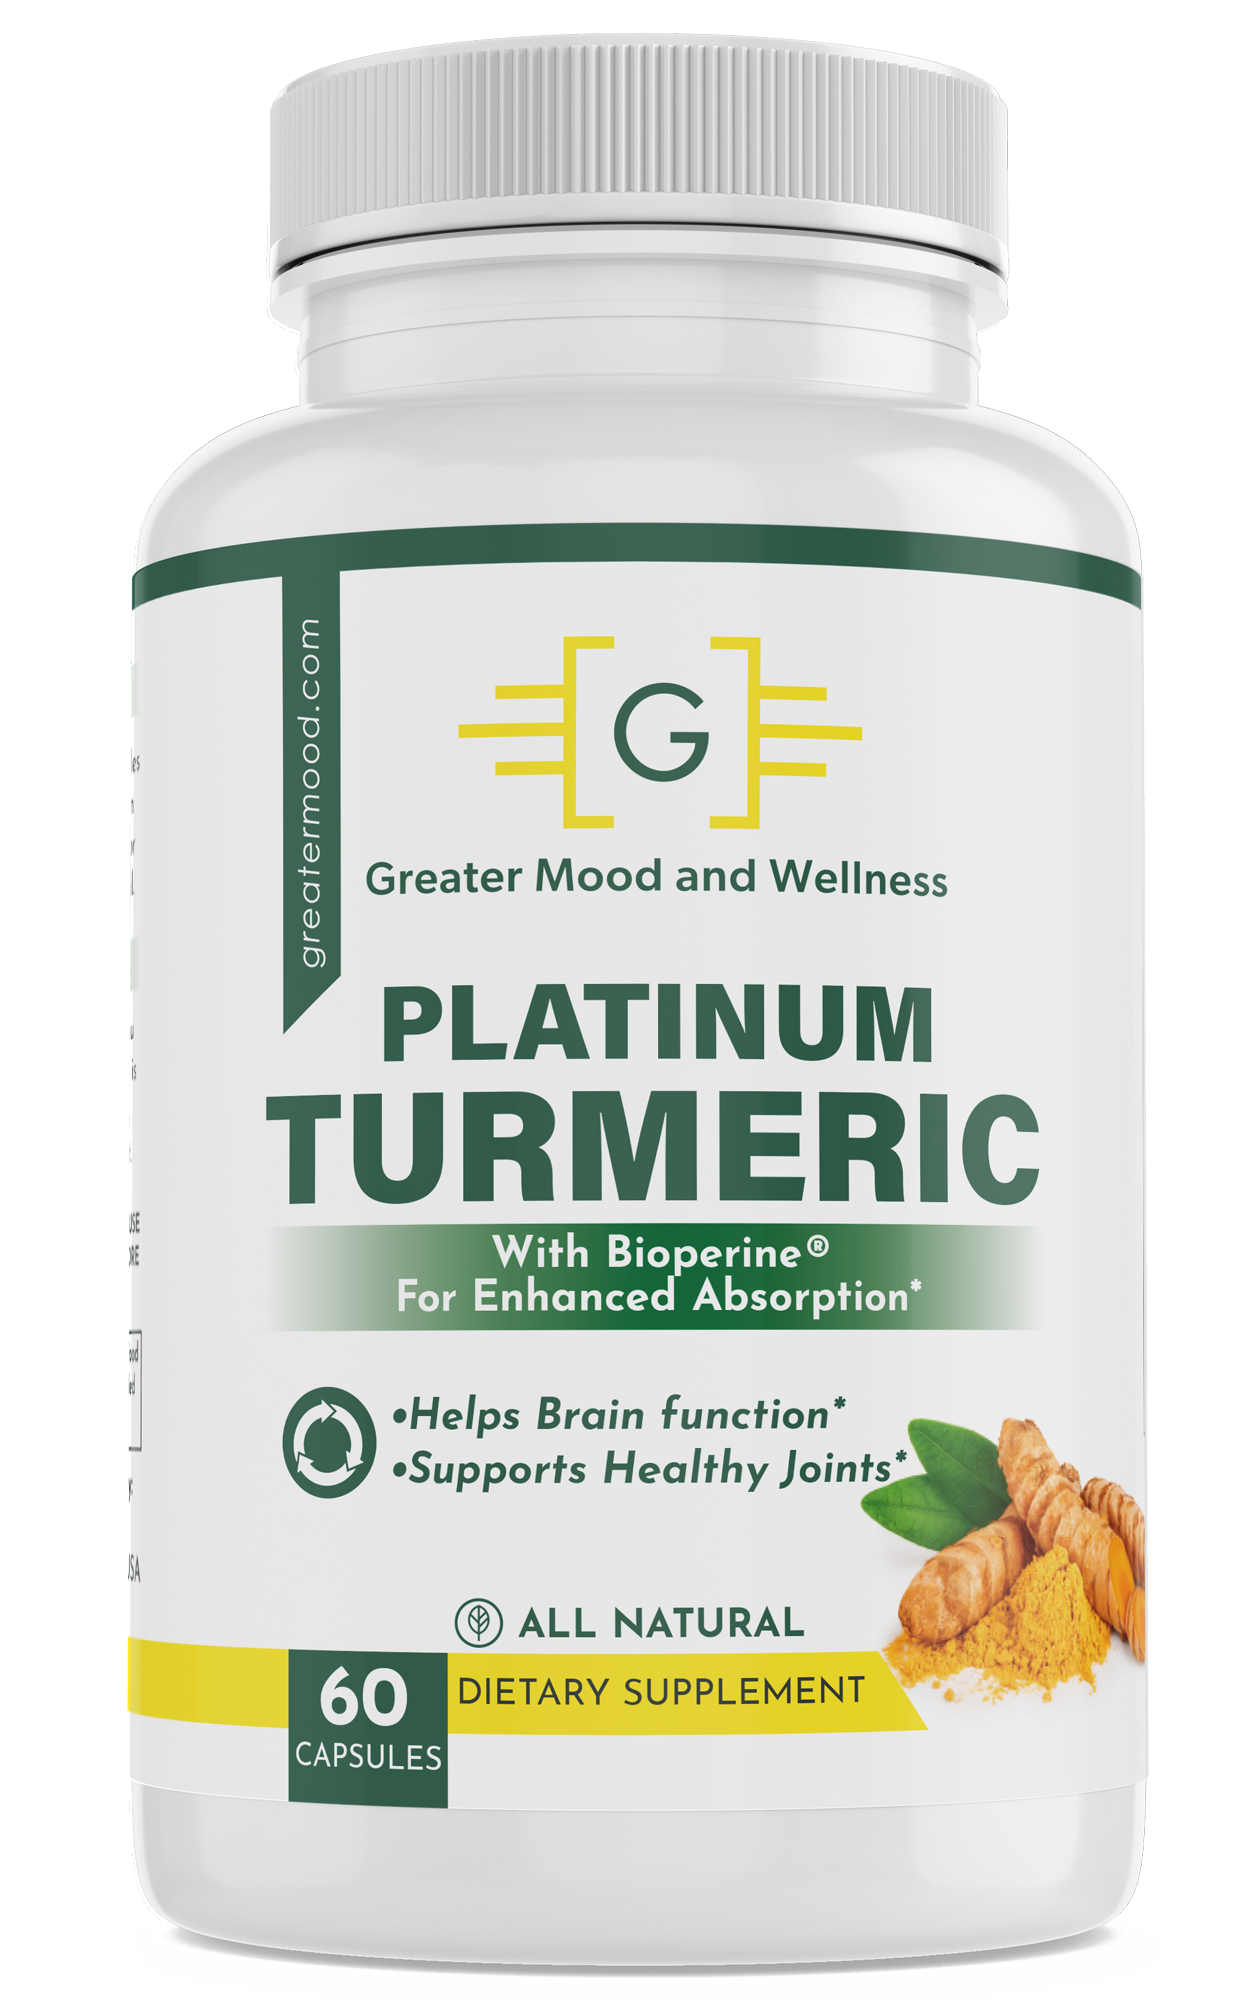 High-quality curcumin supplement with potent anti-inflammatory properties for overall health and wellness.